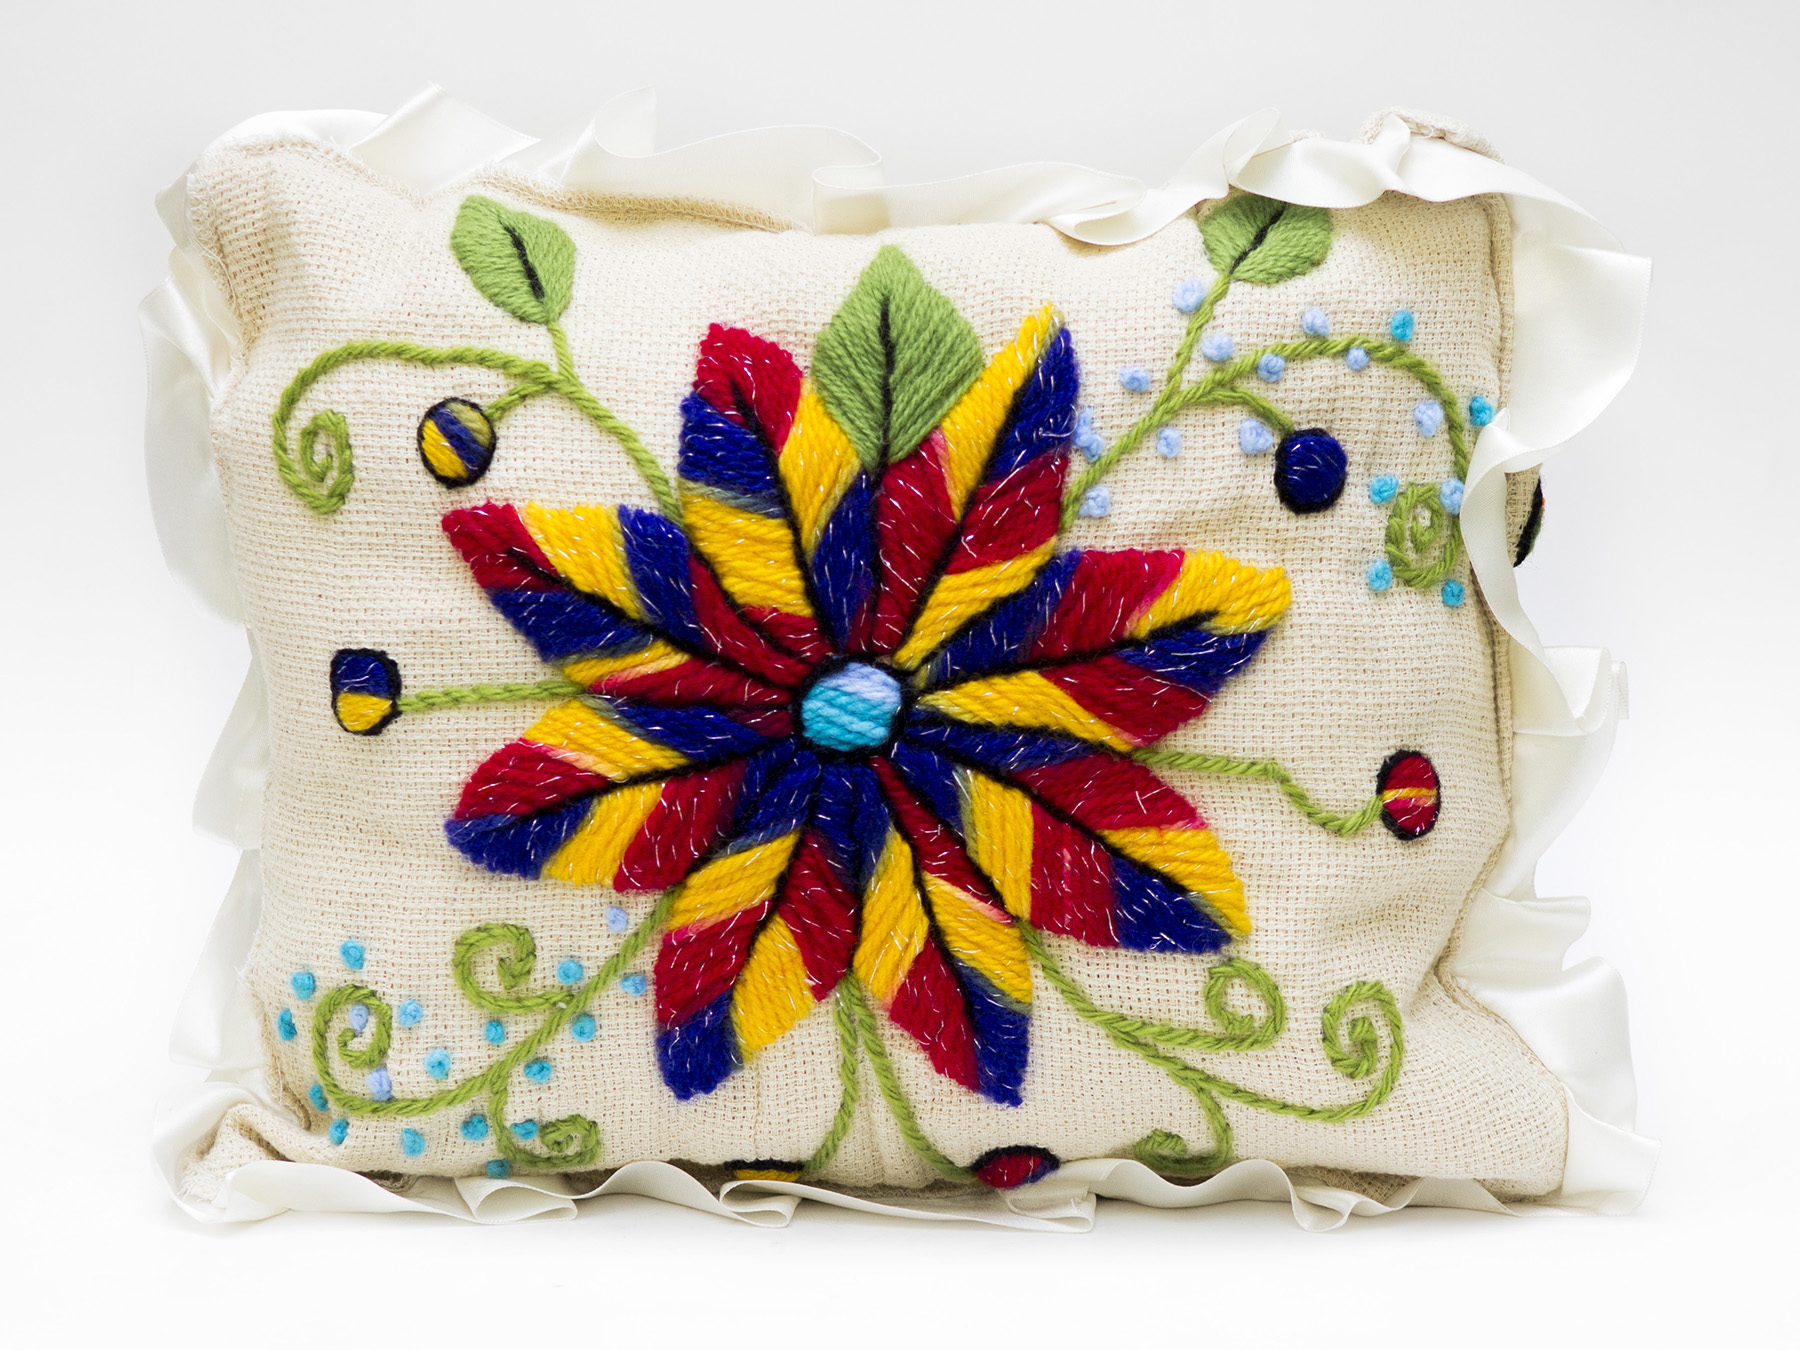 Jute Pillow with Handmade Embroidery